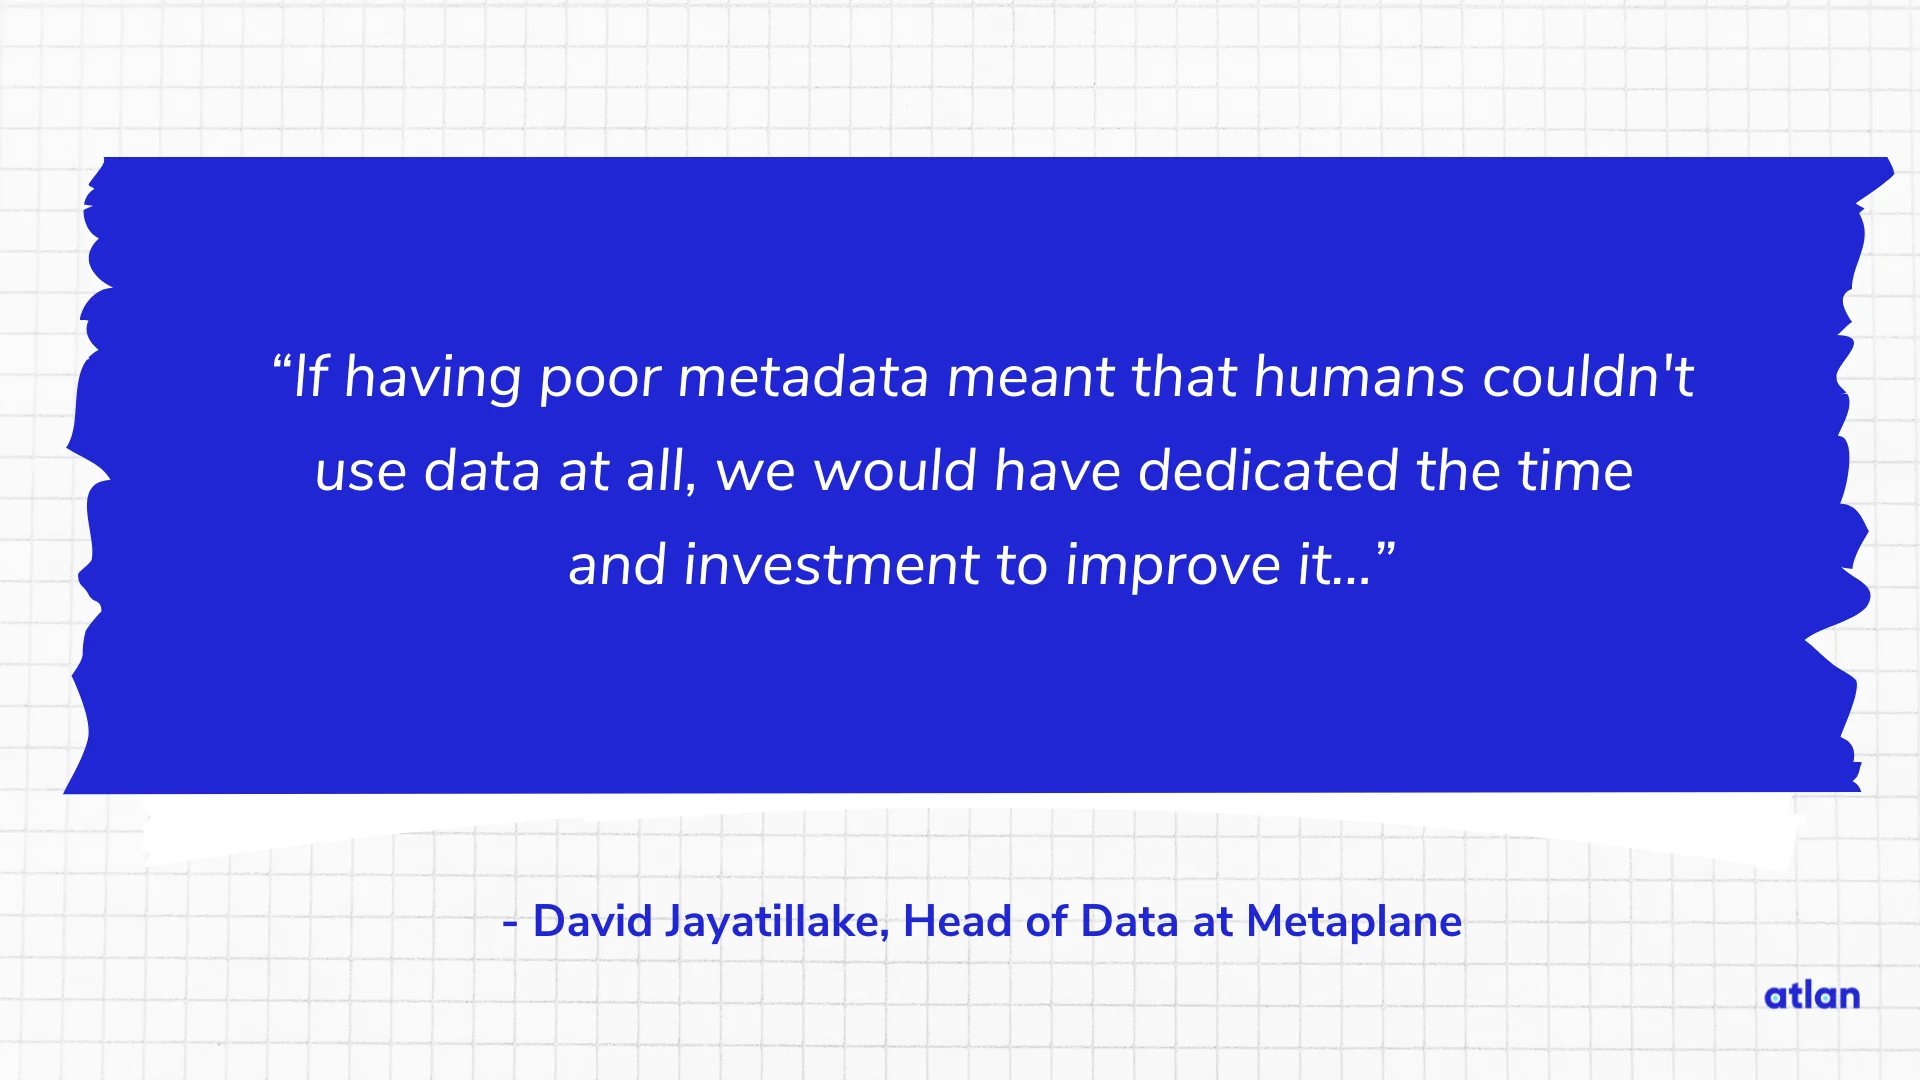 Having poor metadata meant that humans couldn't use data at all